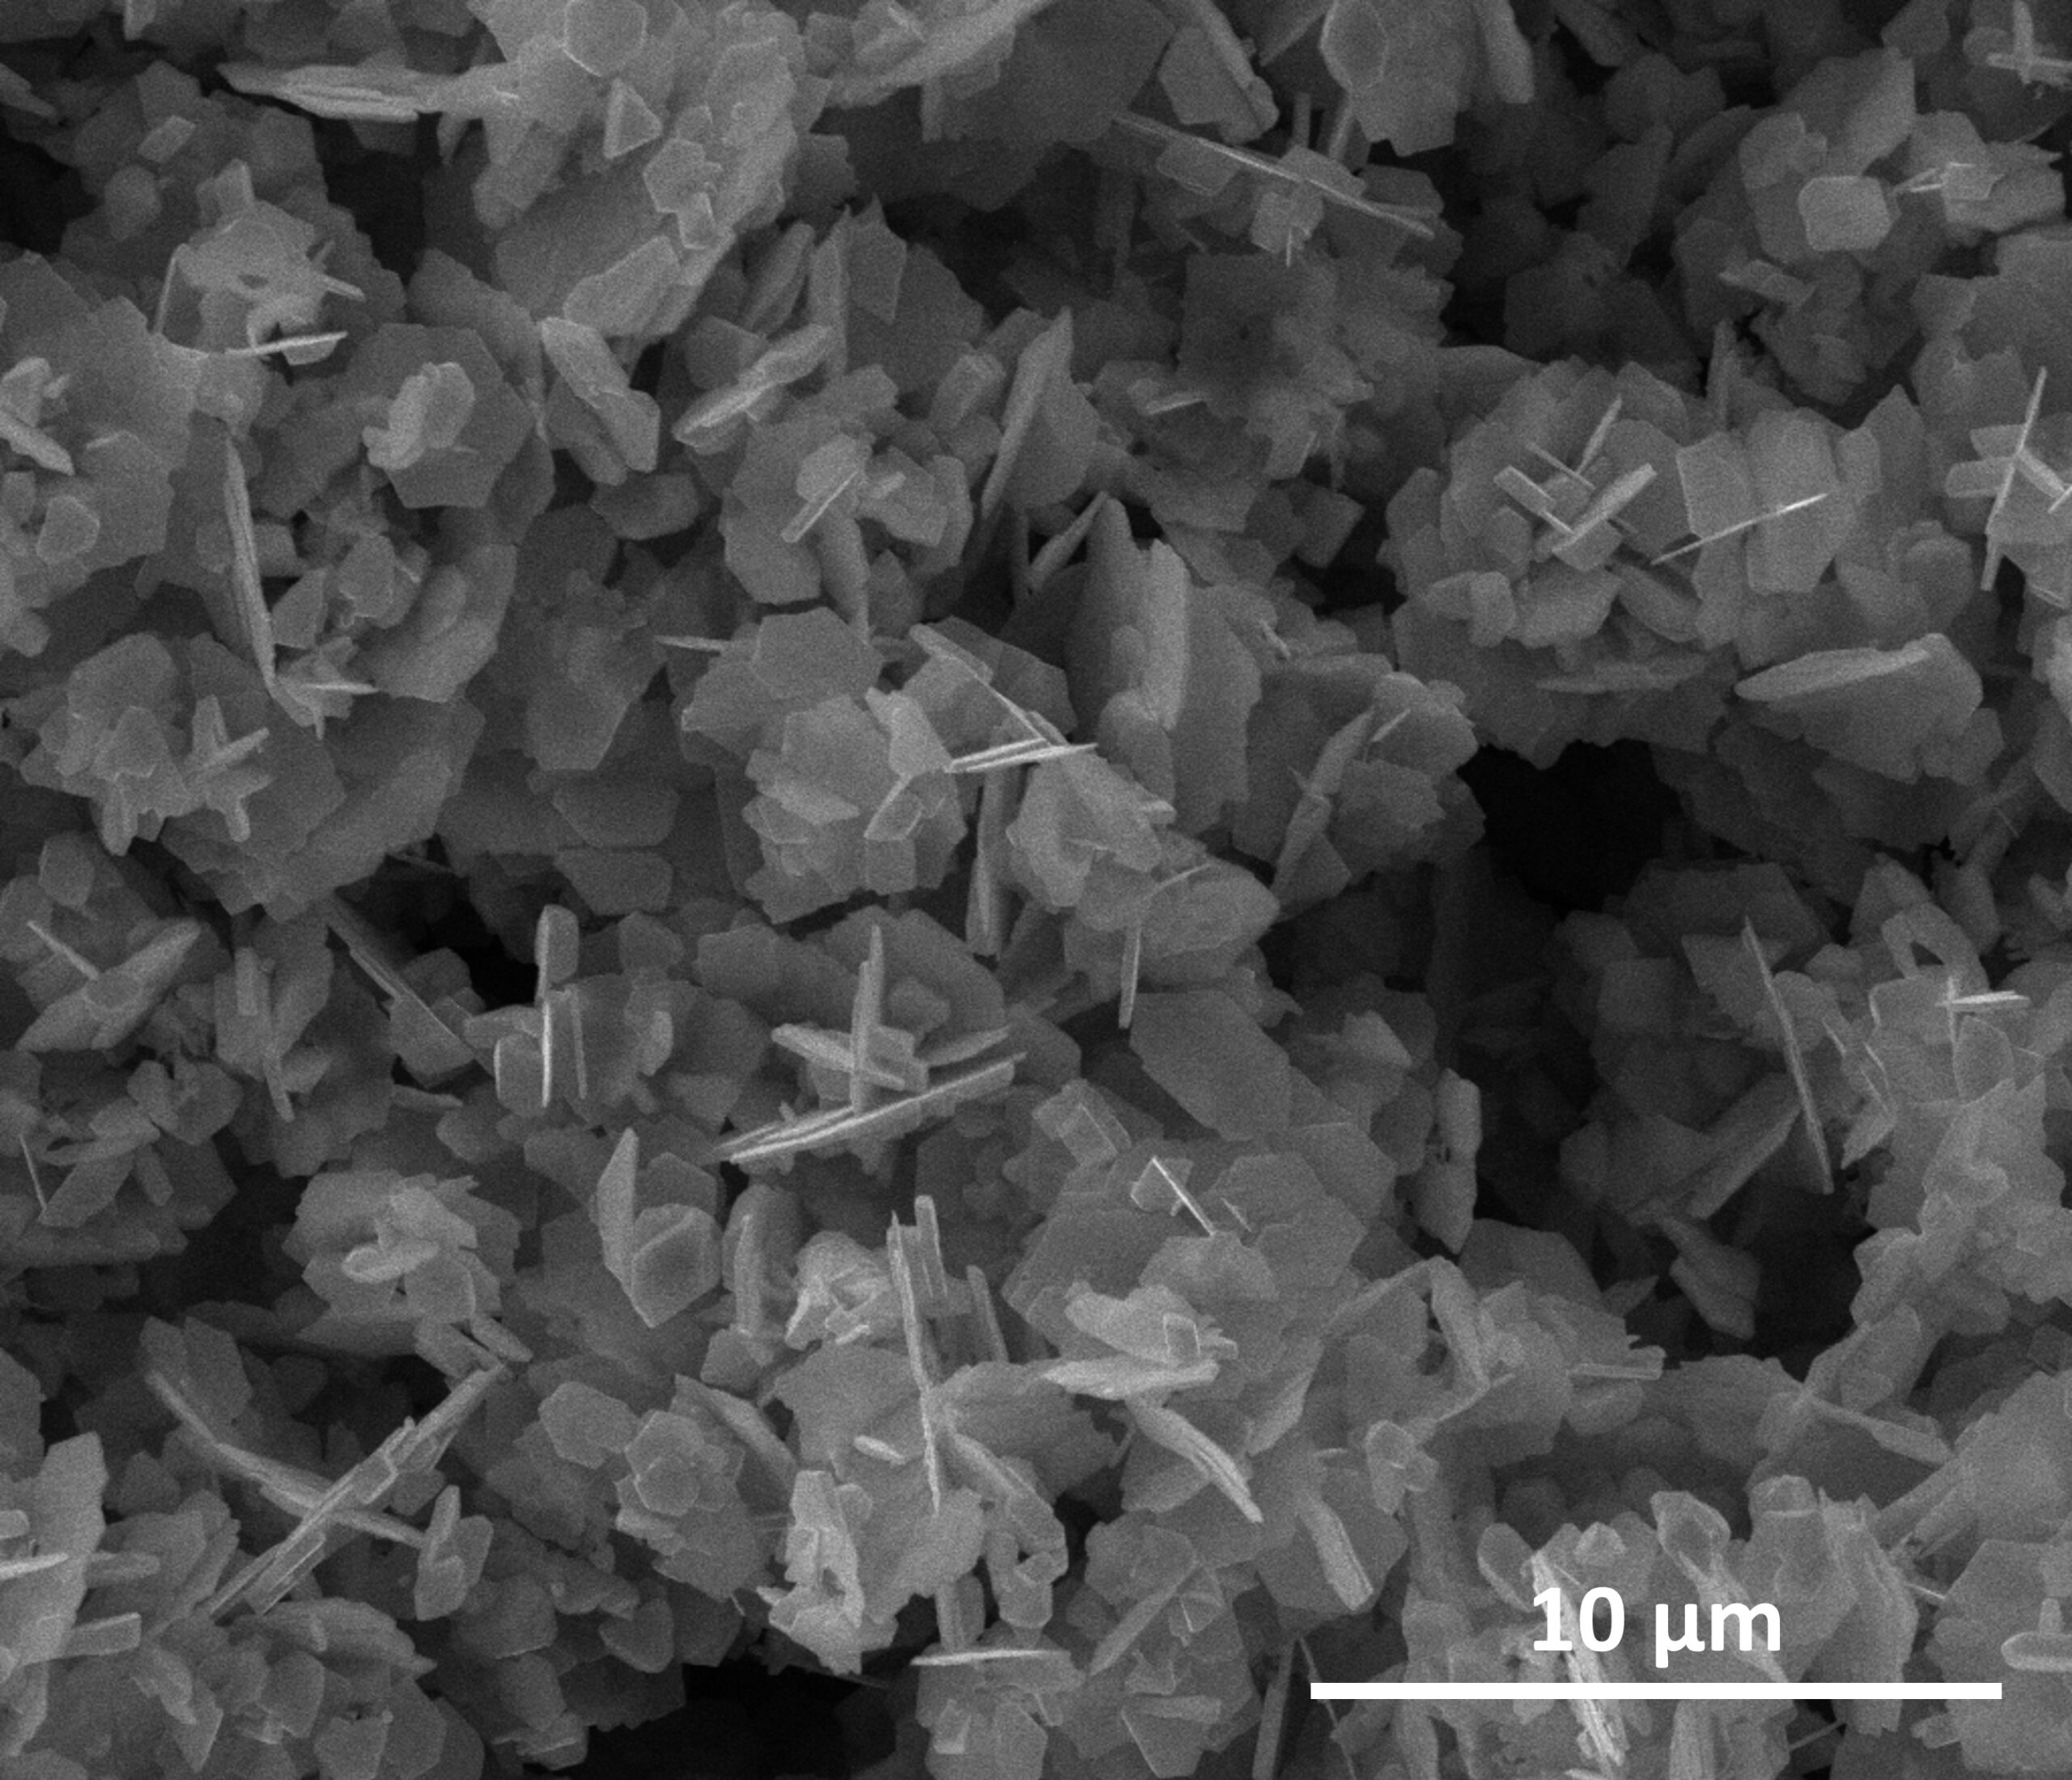 SEM Image of Silver Flakes